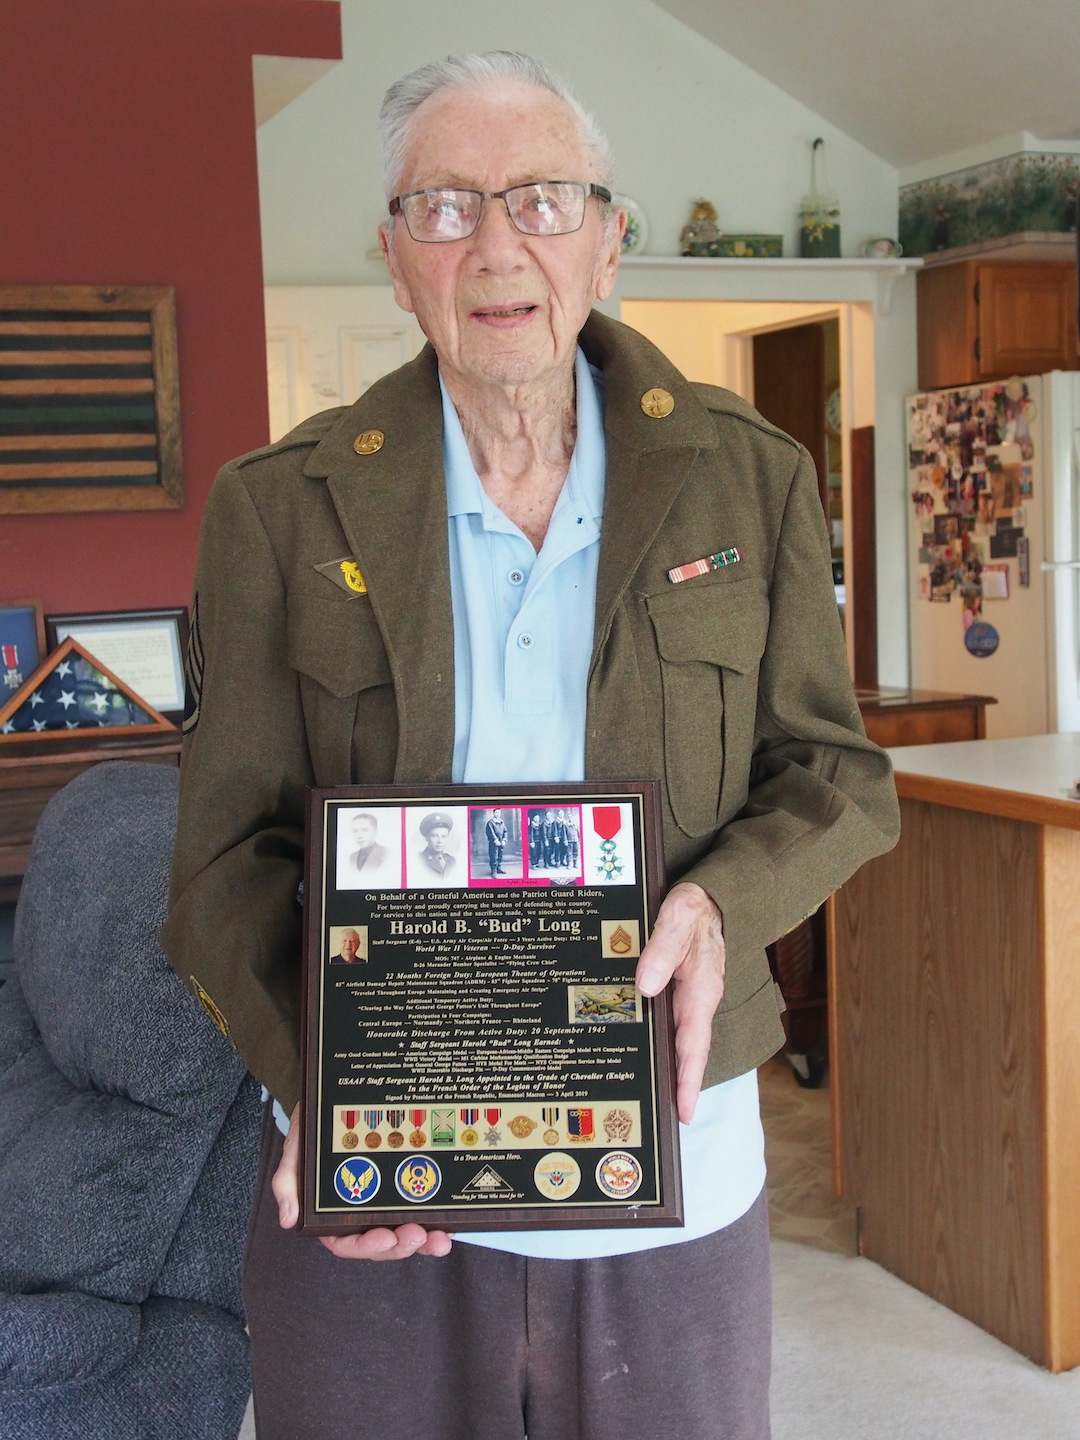 Bud Long shows one of the plaques describing his military service during World War II.